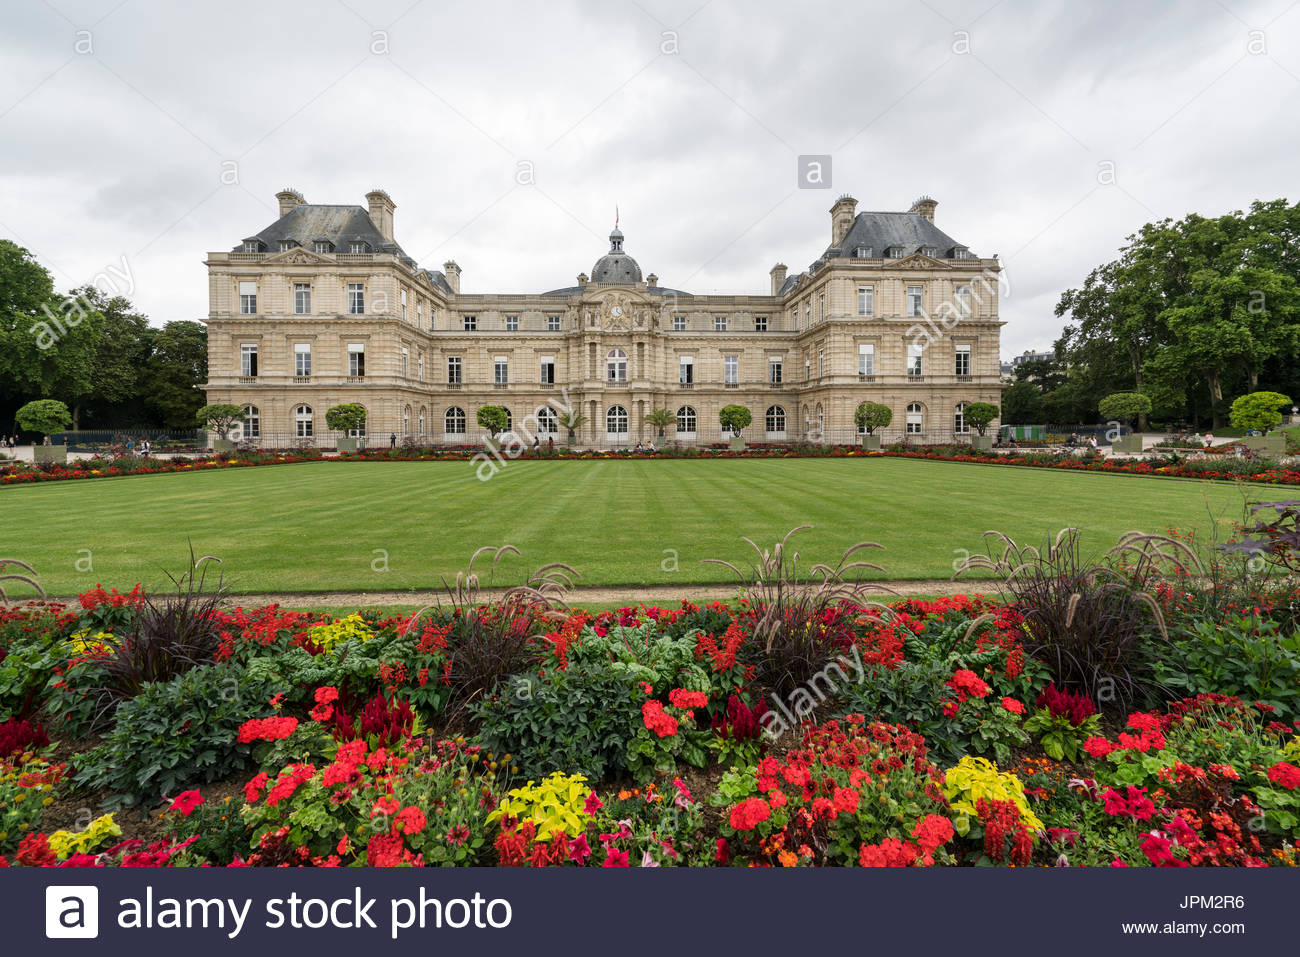 a panoramic view of the luxembourg palace in le jardin du luxembourg JPM2R6